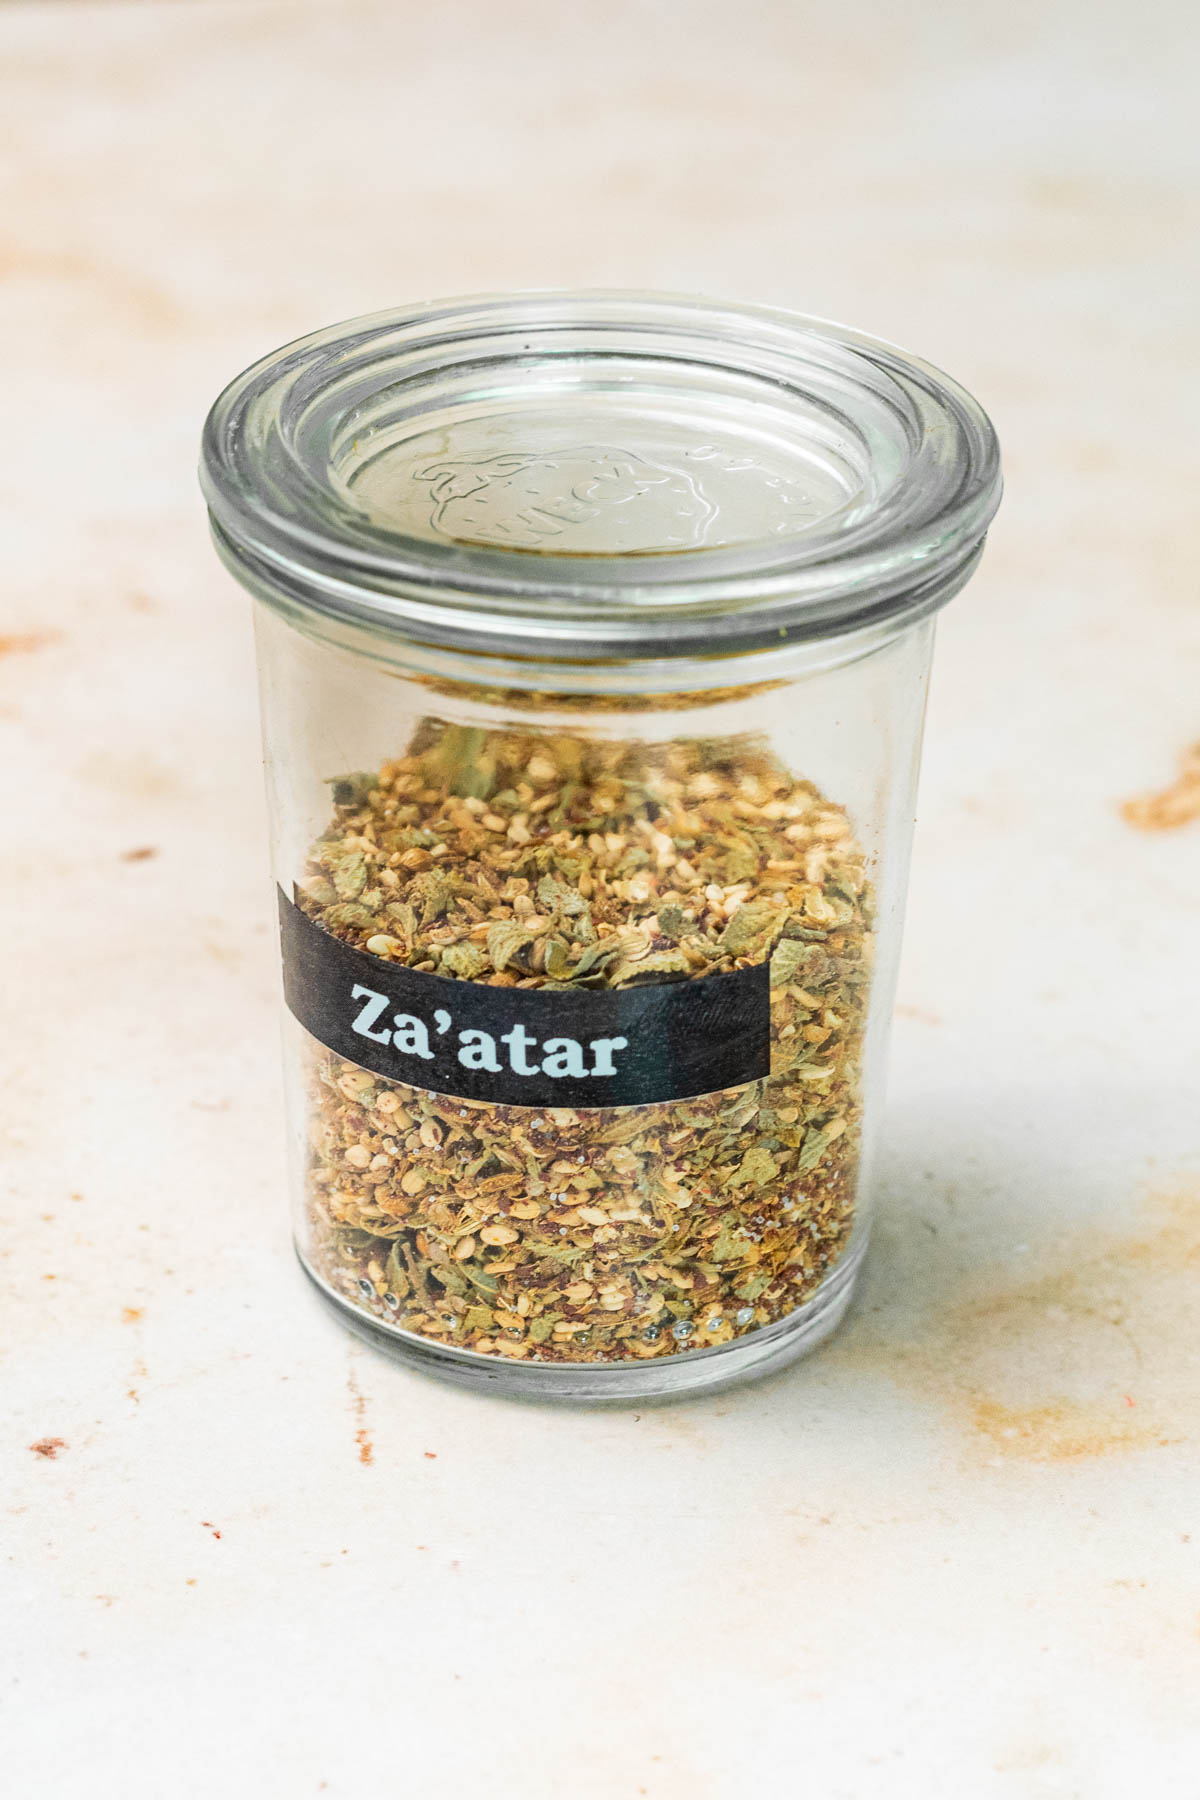 Jar of za'atar with a label.